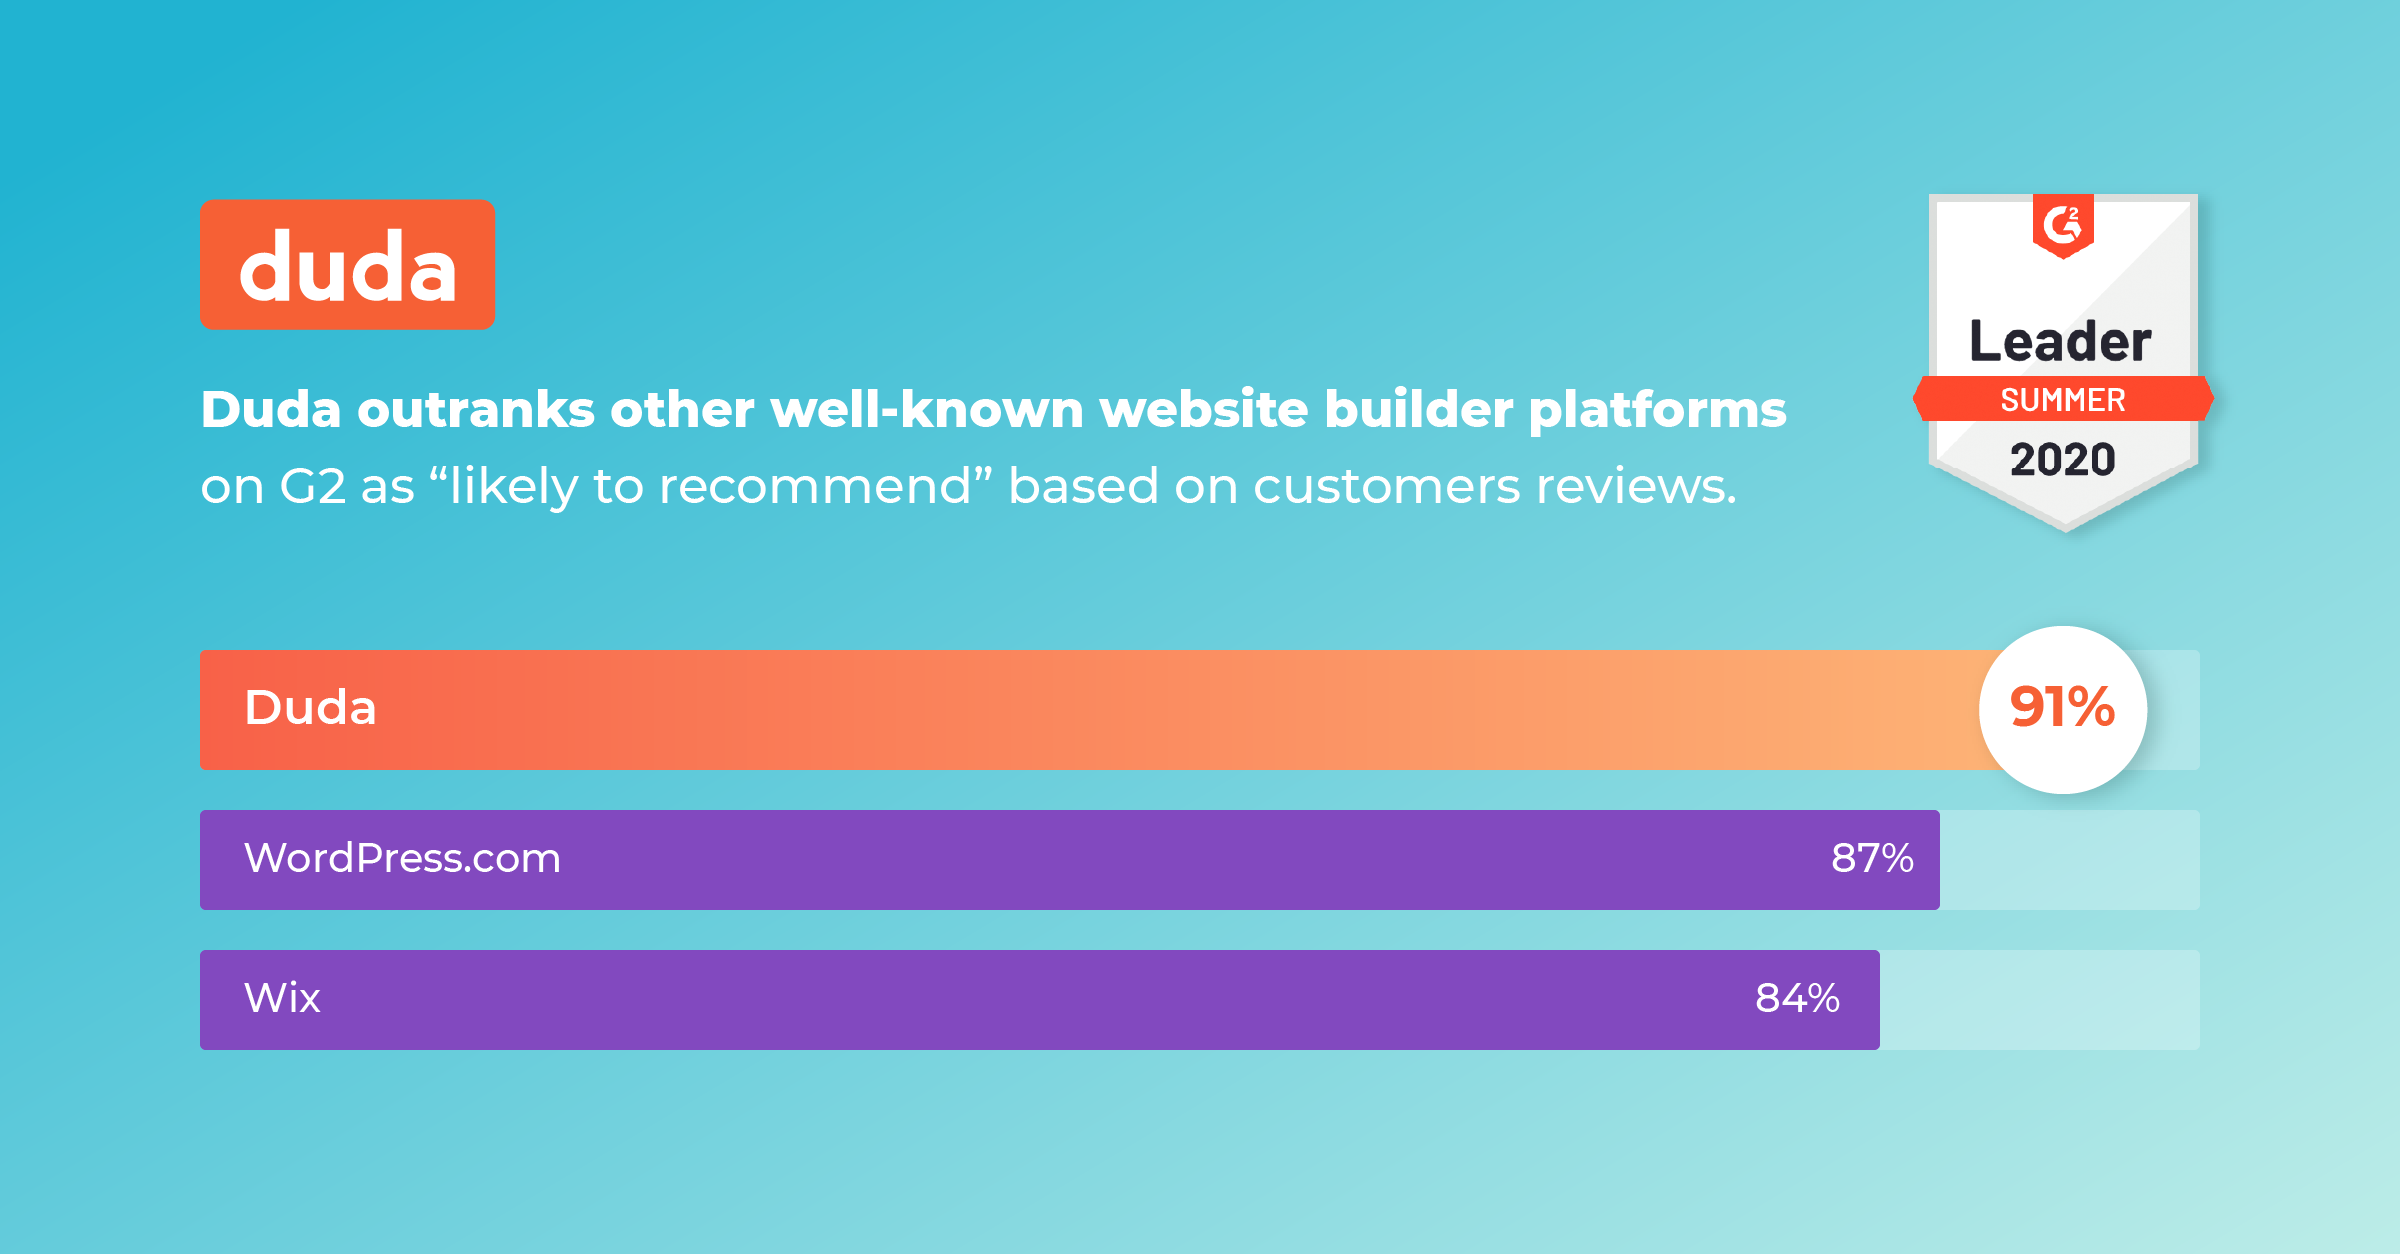 Duda earned its position as a Leader in G2's Summer 2020 Website Builder Grid Report